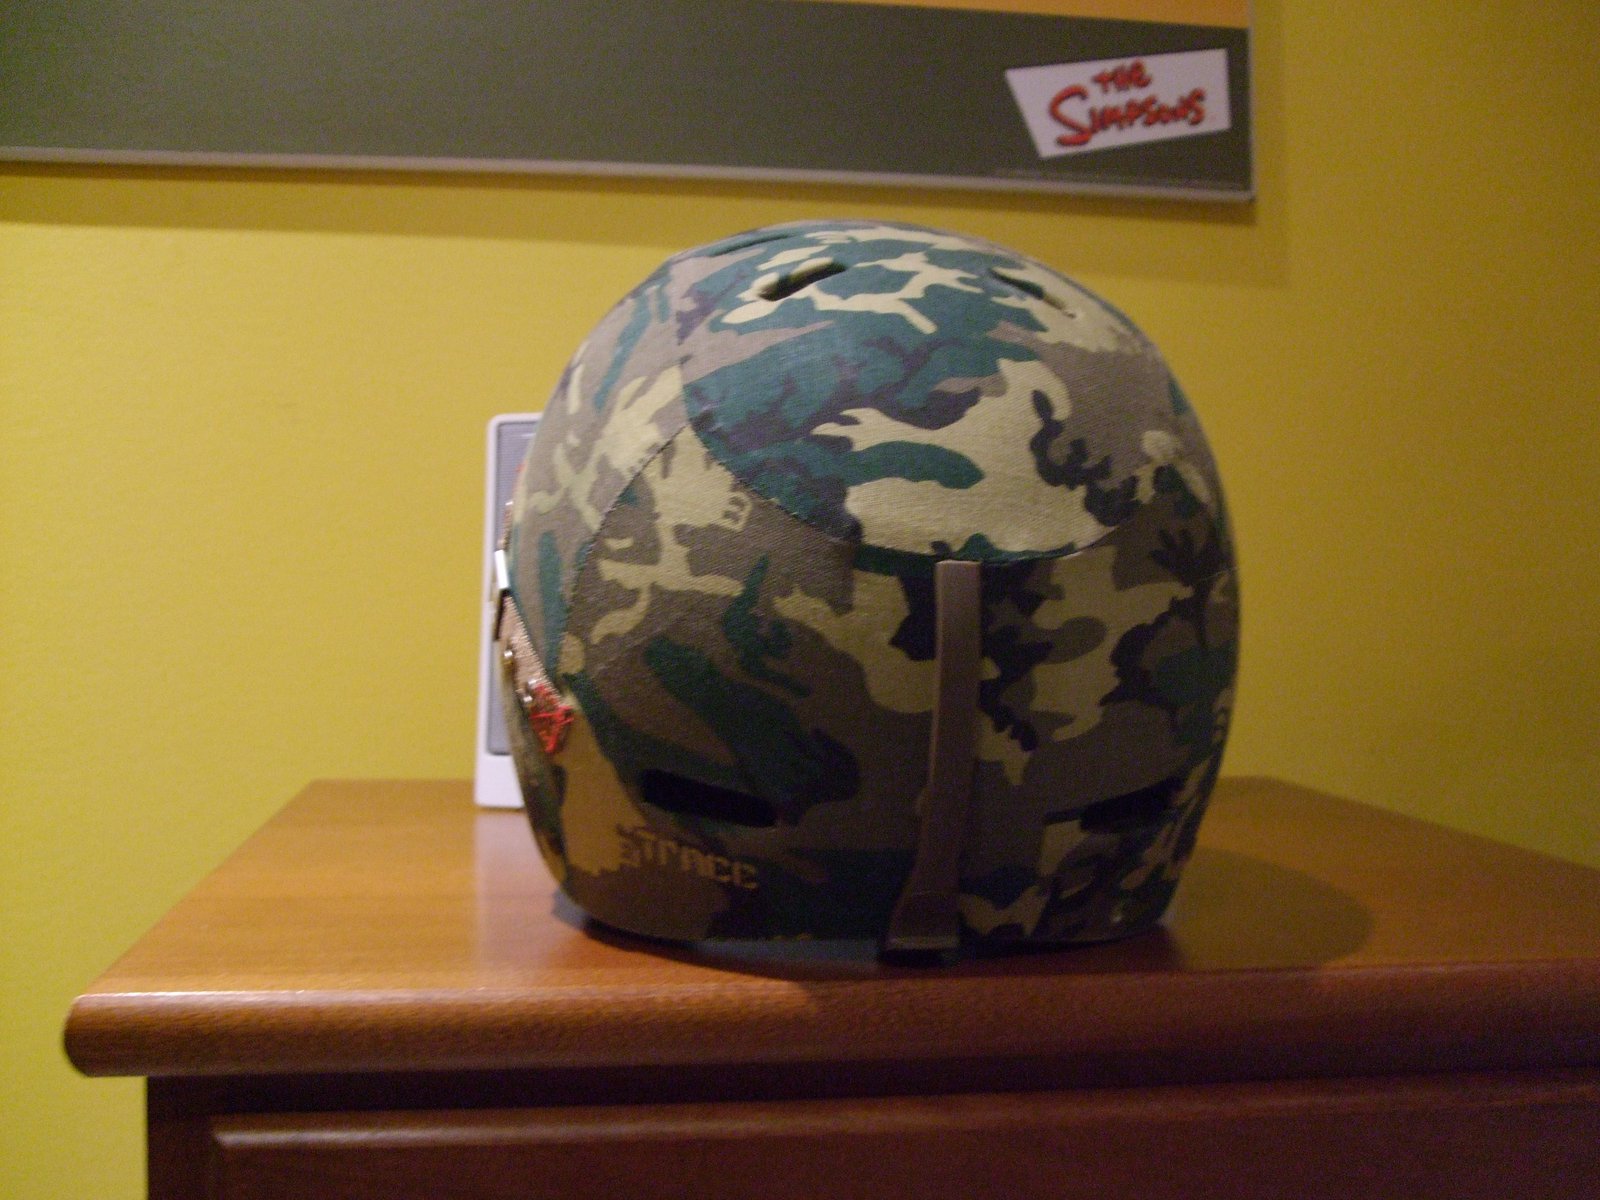 RED trace helmet